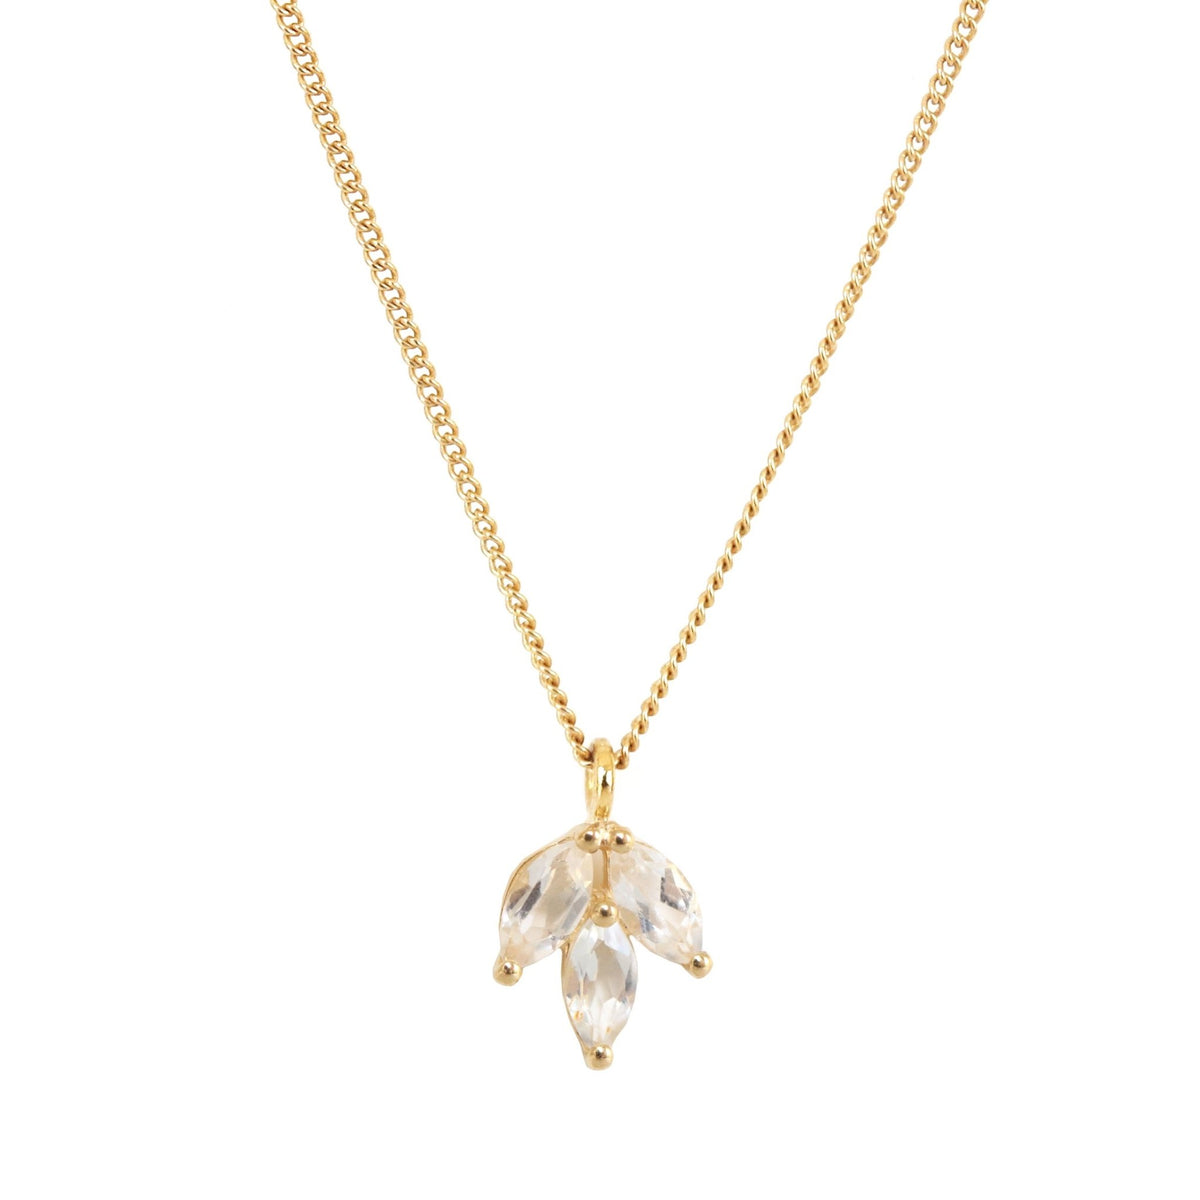 FRAICHE INSPIRE CRYSTAL OLIVE LEAF NECKLACE - WHITE TOPAZ &amp; GOLD - SO PRETTY CARA COTTER